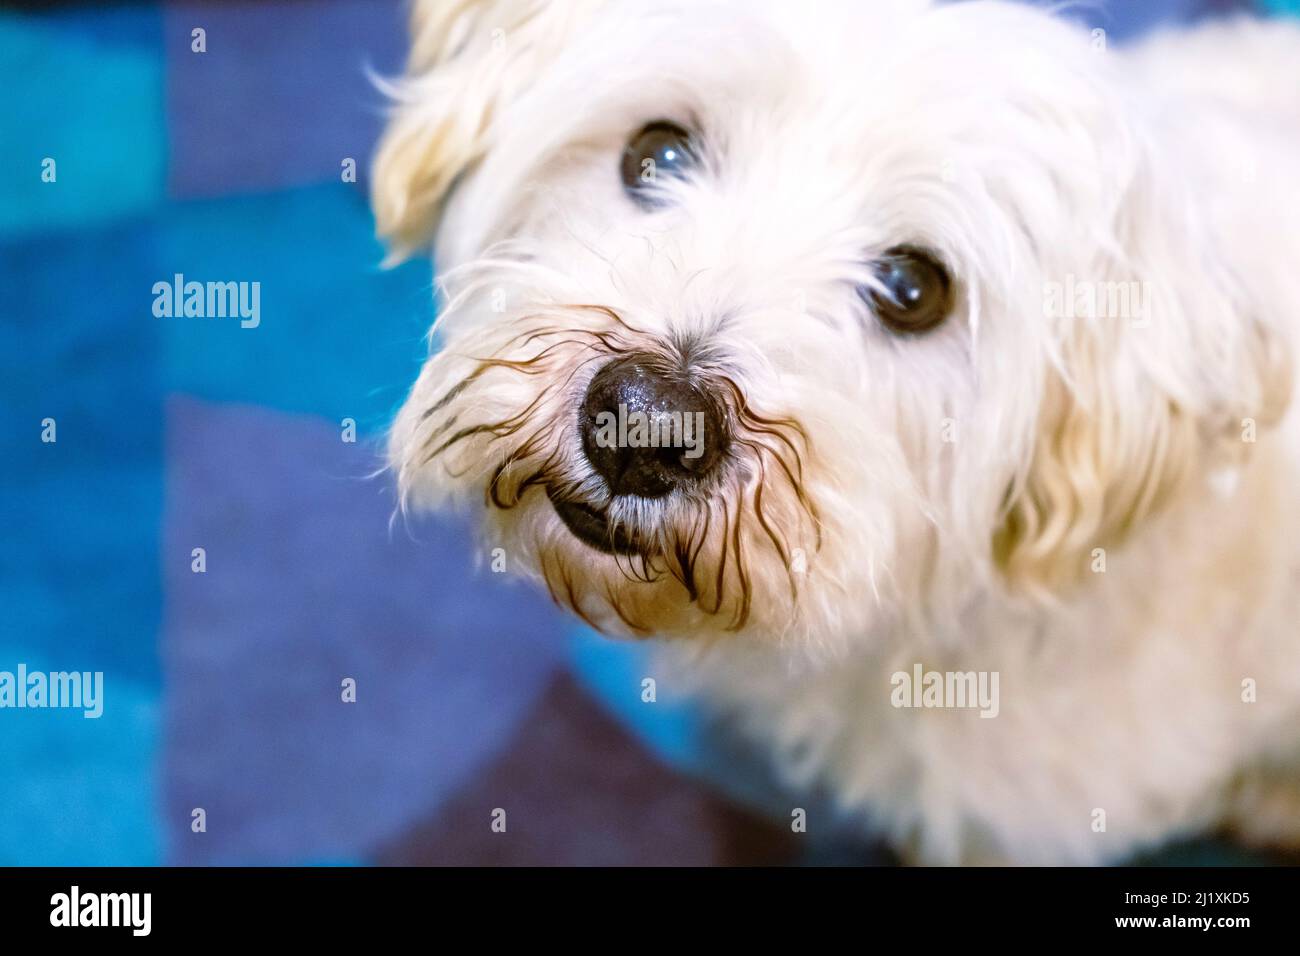 Portrait of a small white dog looking up to the camera where he is sitting on a blue carpet. Stock Photo